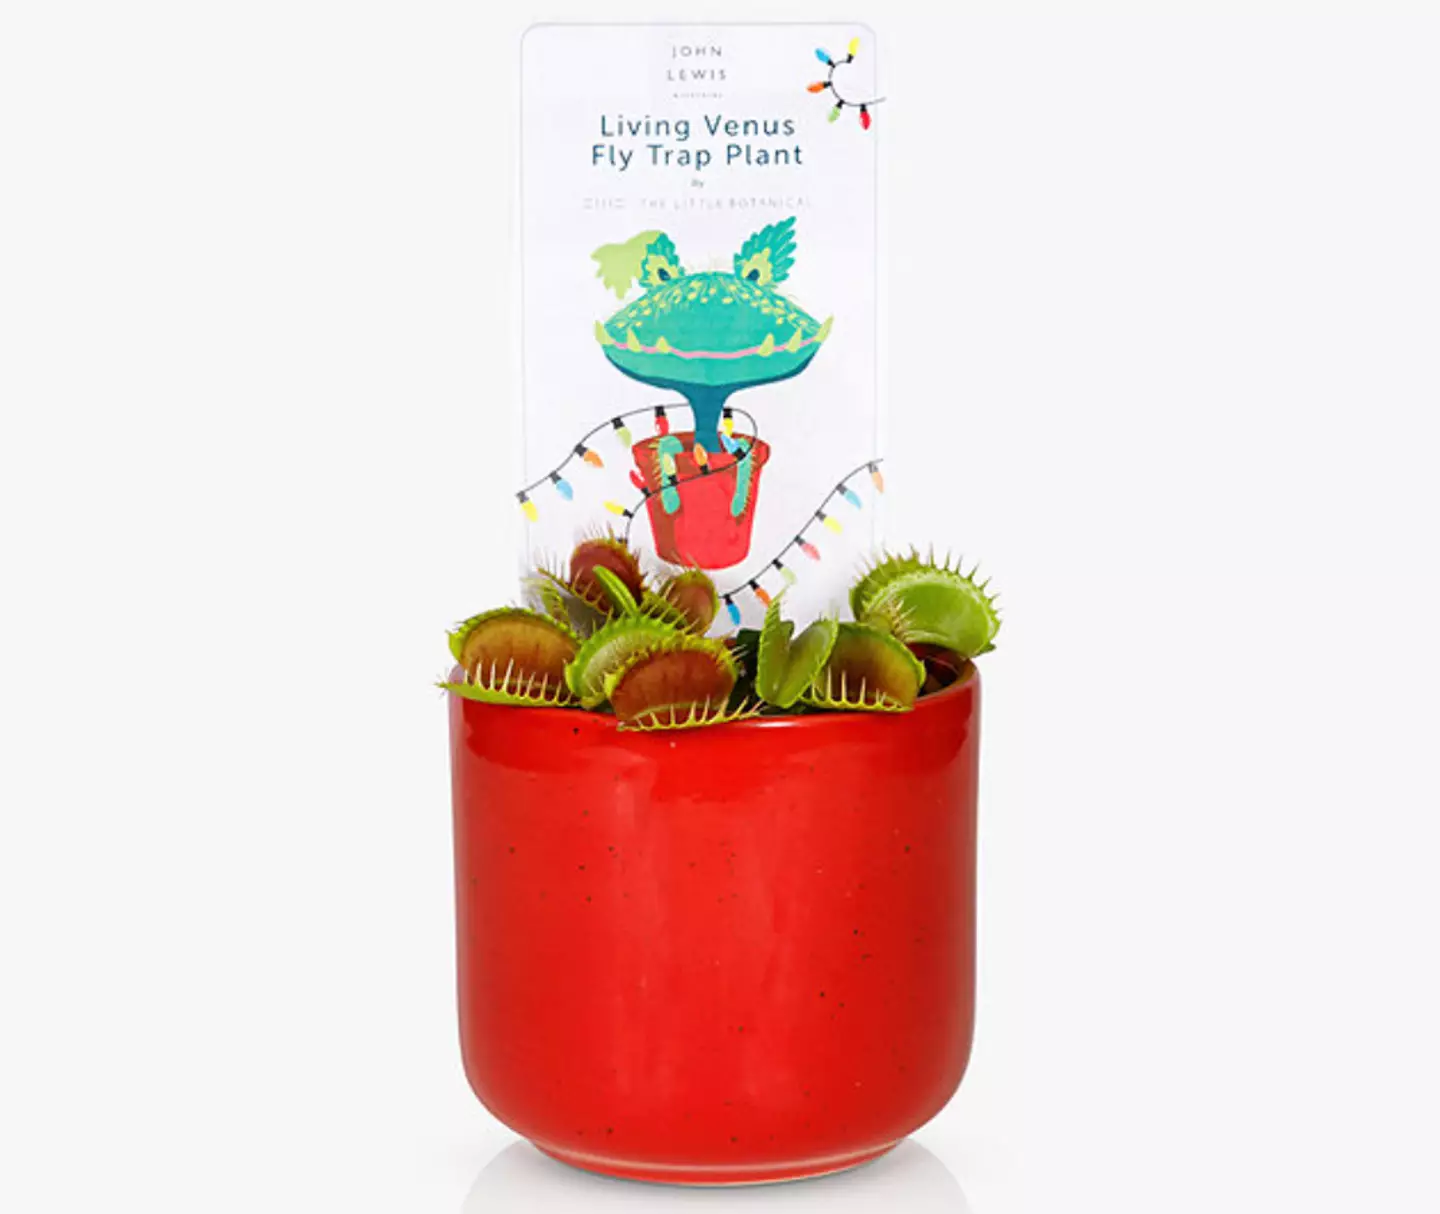 You can even buy a living venus fly trap.